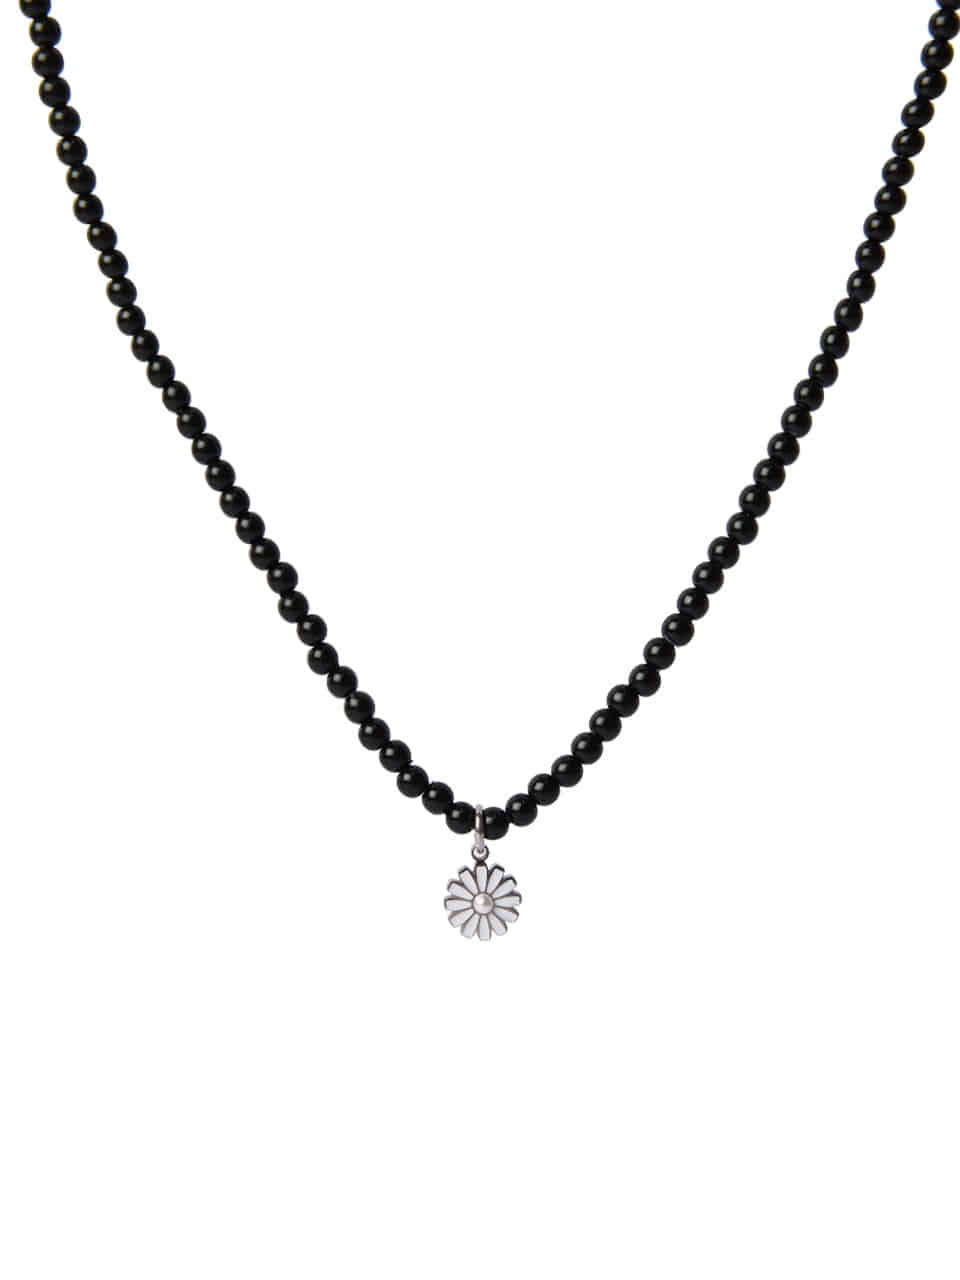 BHS202 Pearl Daisy Black Beads Choker Necklace